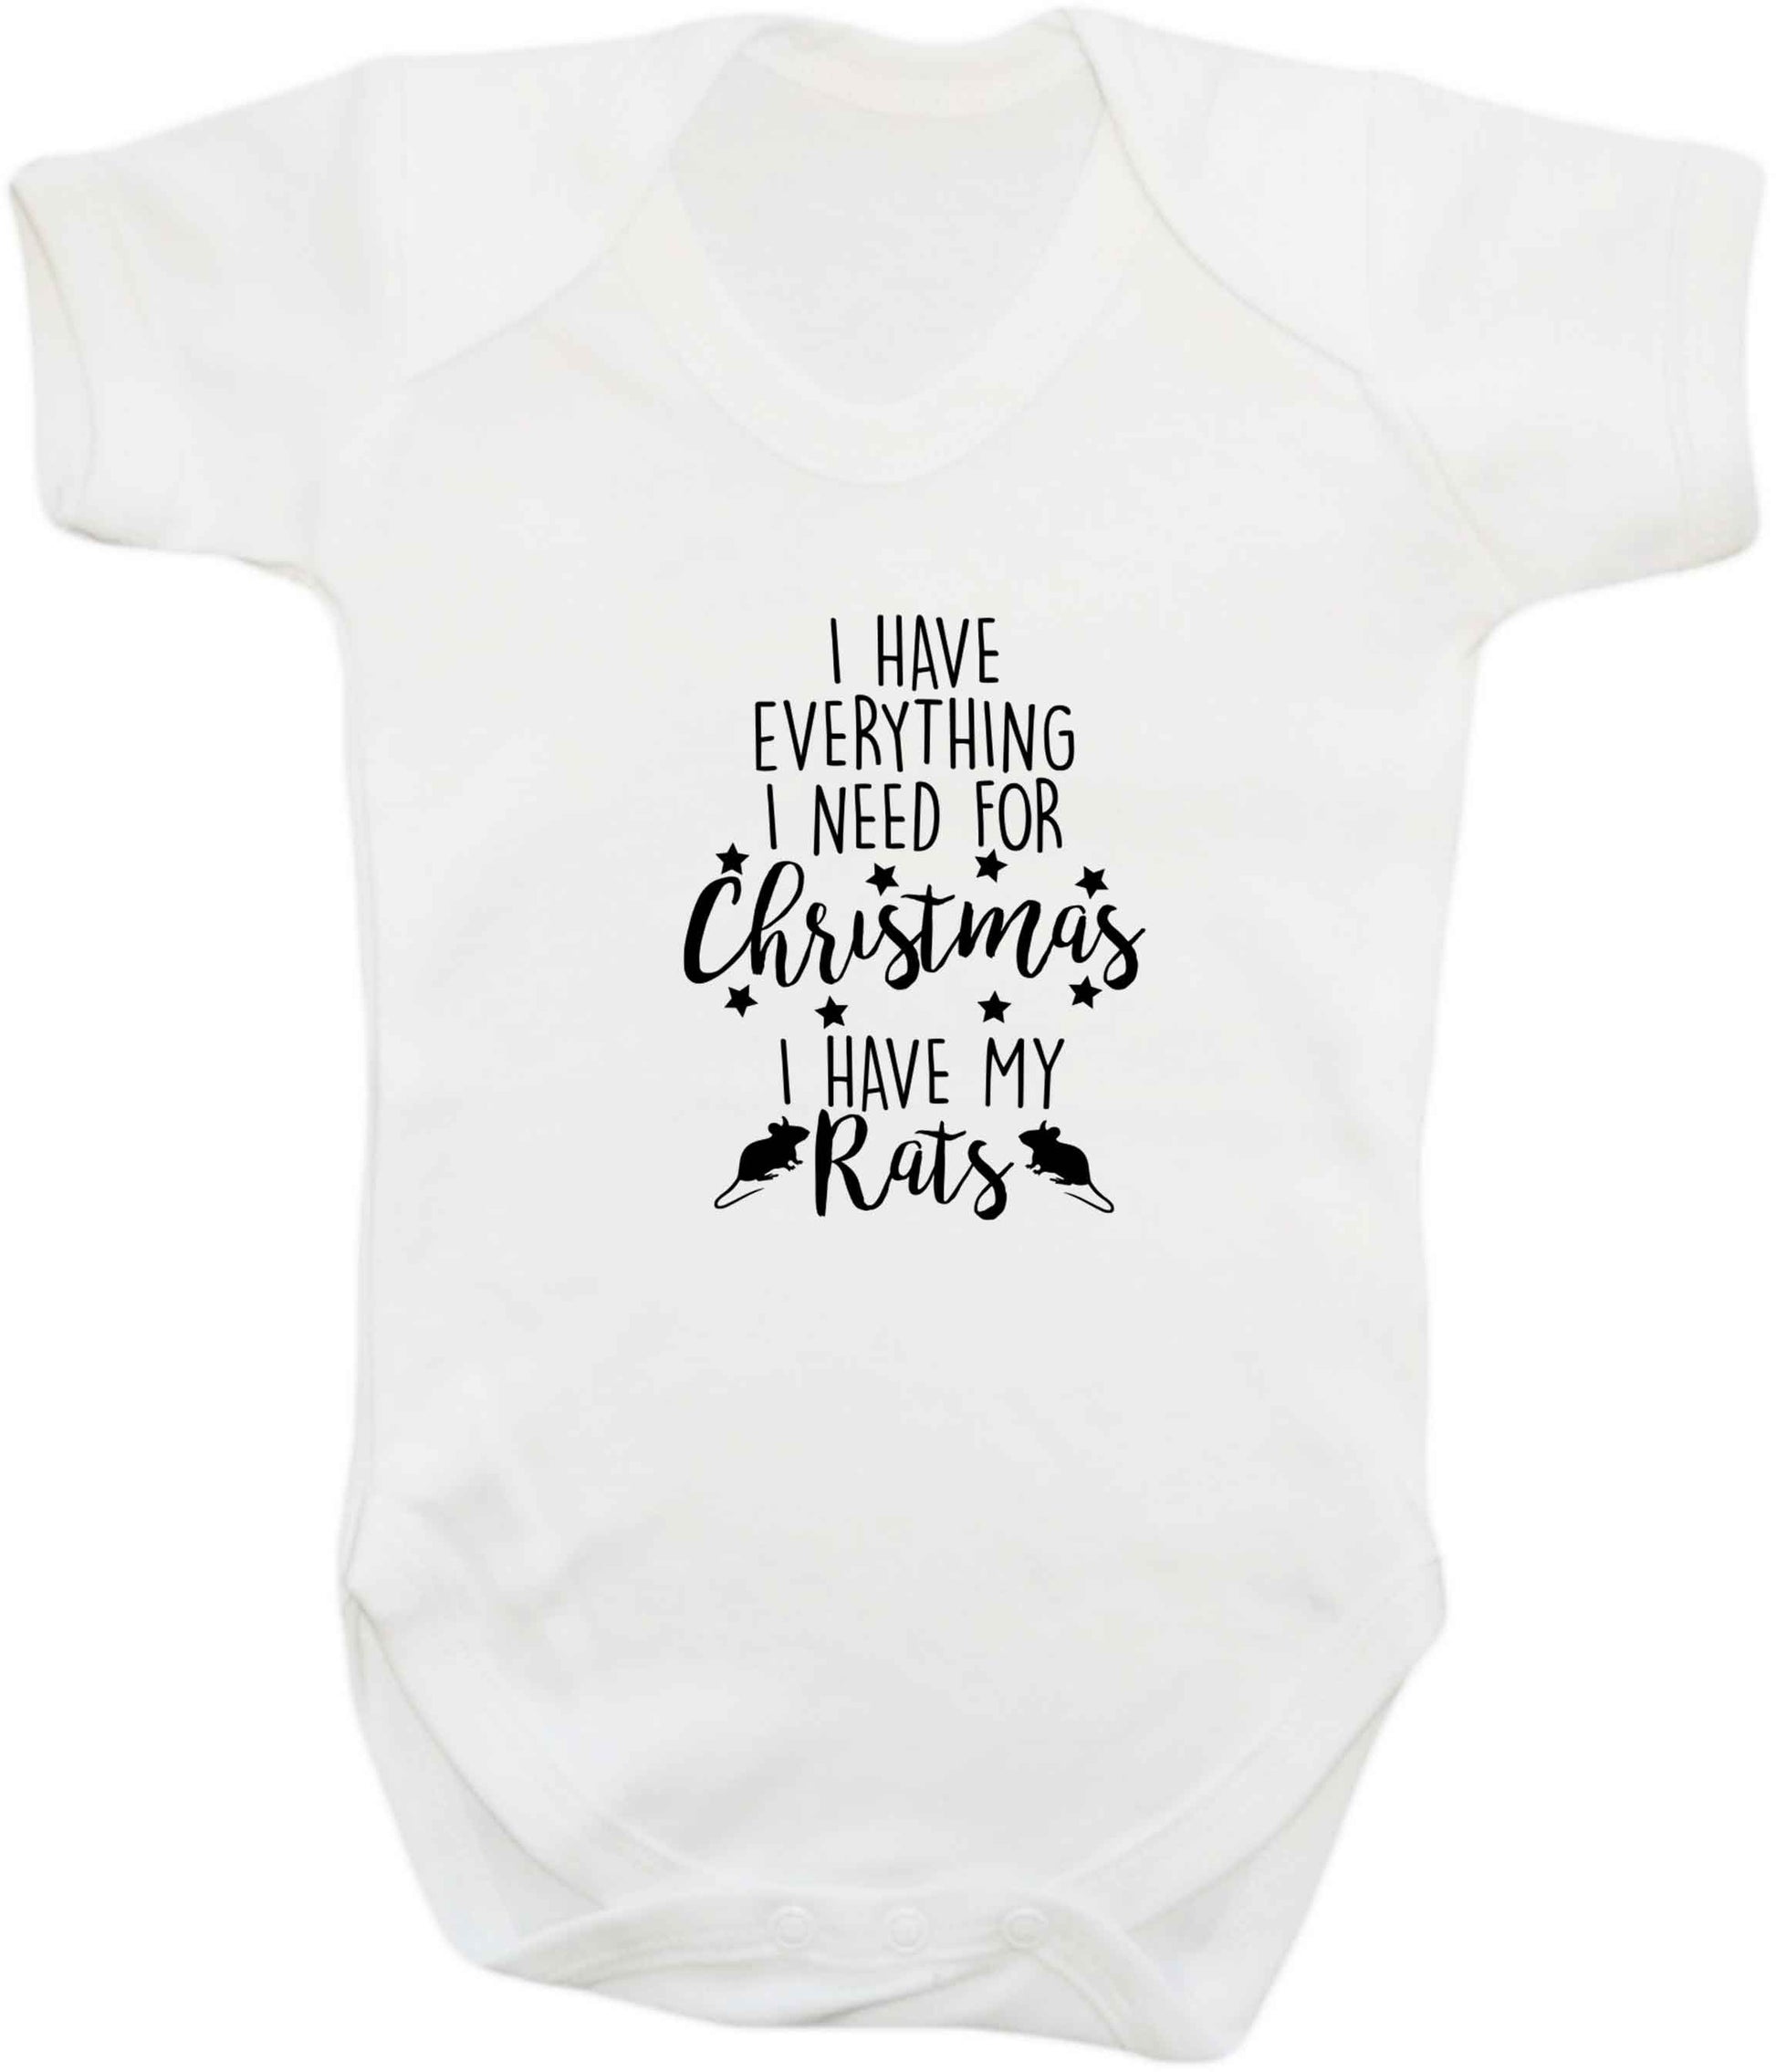 I have everything I need for Christmas I have my rats baby vest white 18-24 months